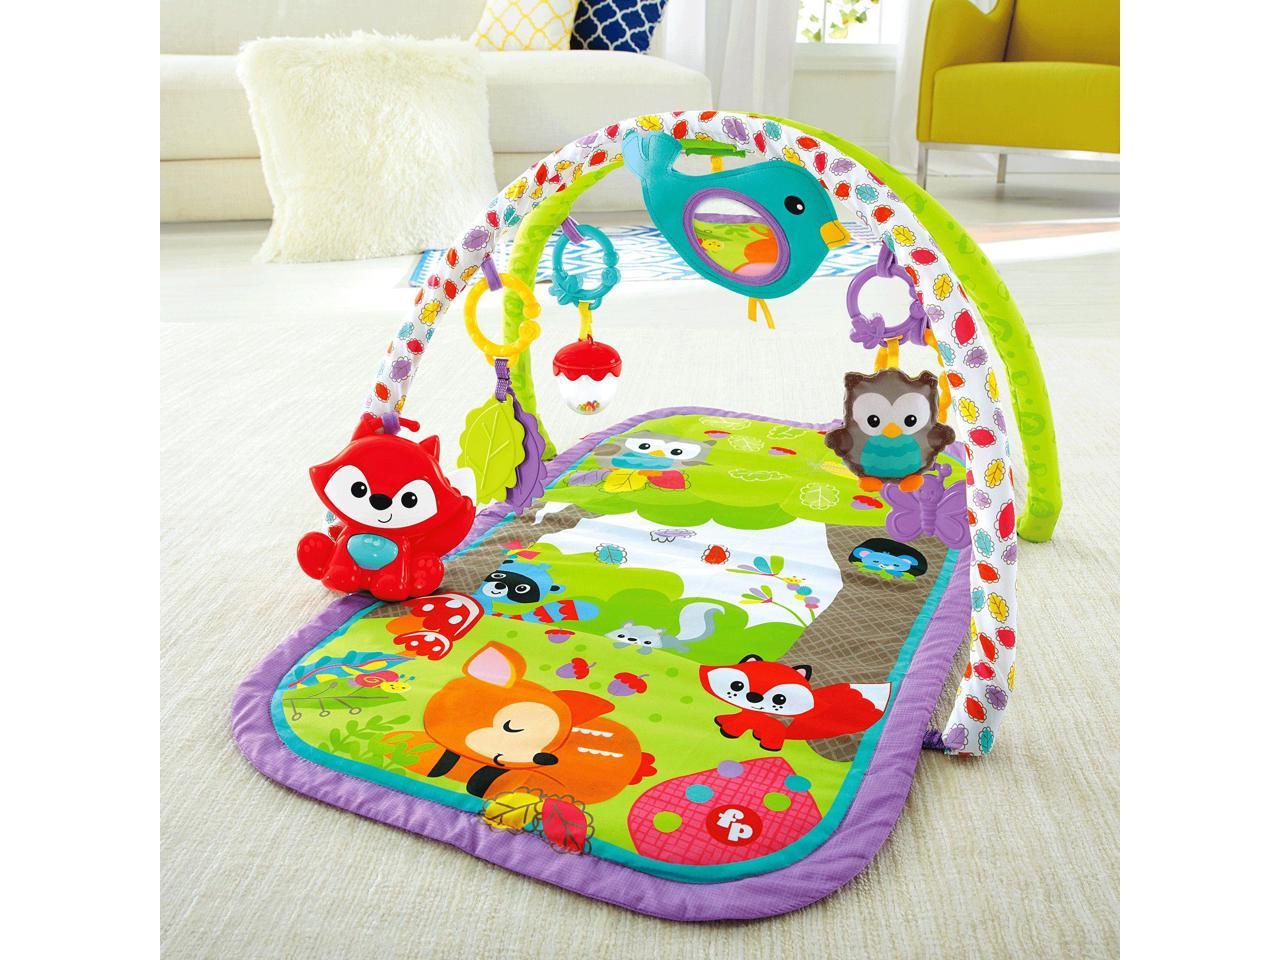 3 in 1 musical activity gym